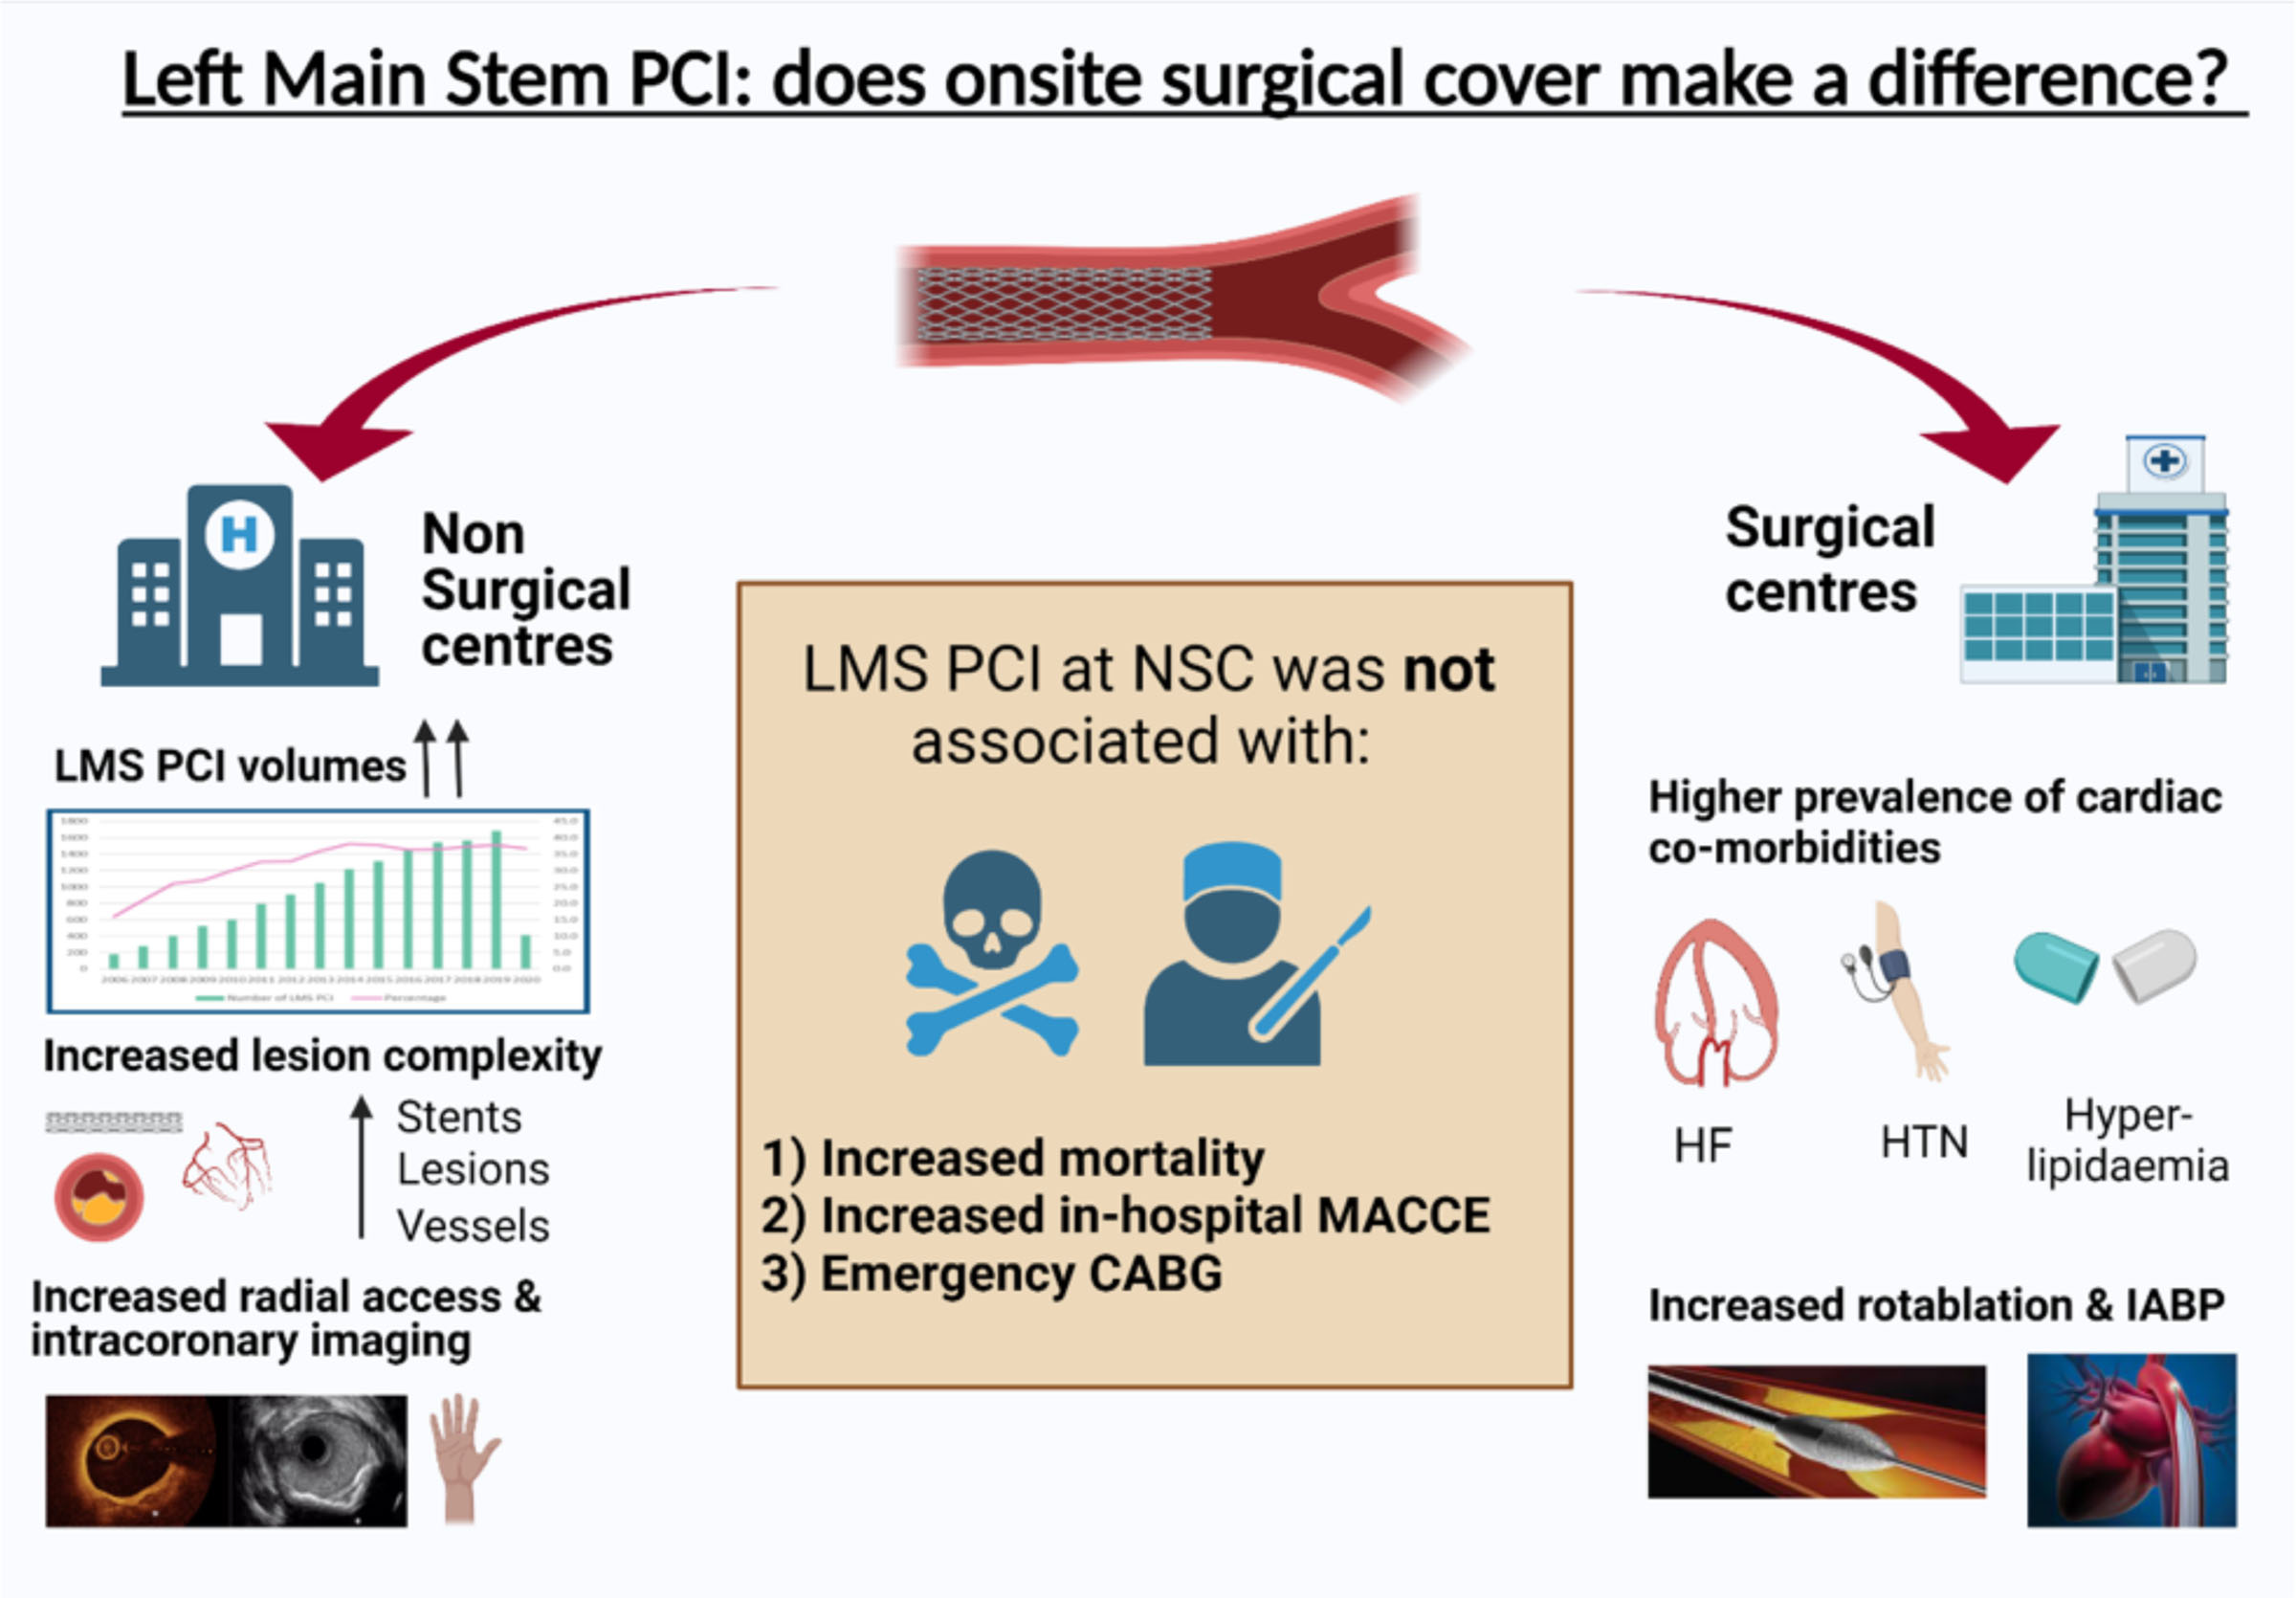 Left Main Stem Percutaneous Coronary Intervention: Does On-Site Surgical Cover Make a Difference?